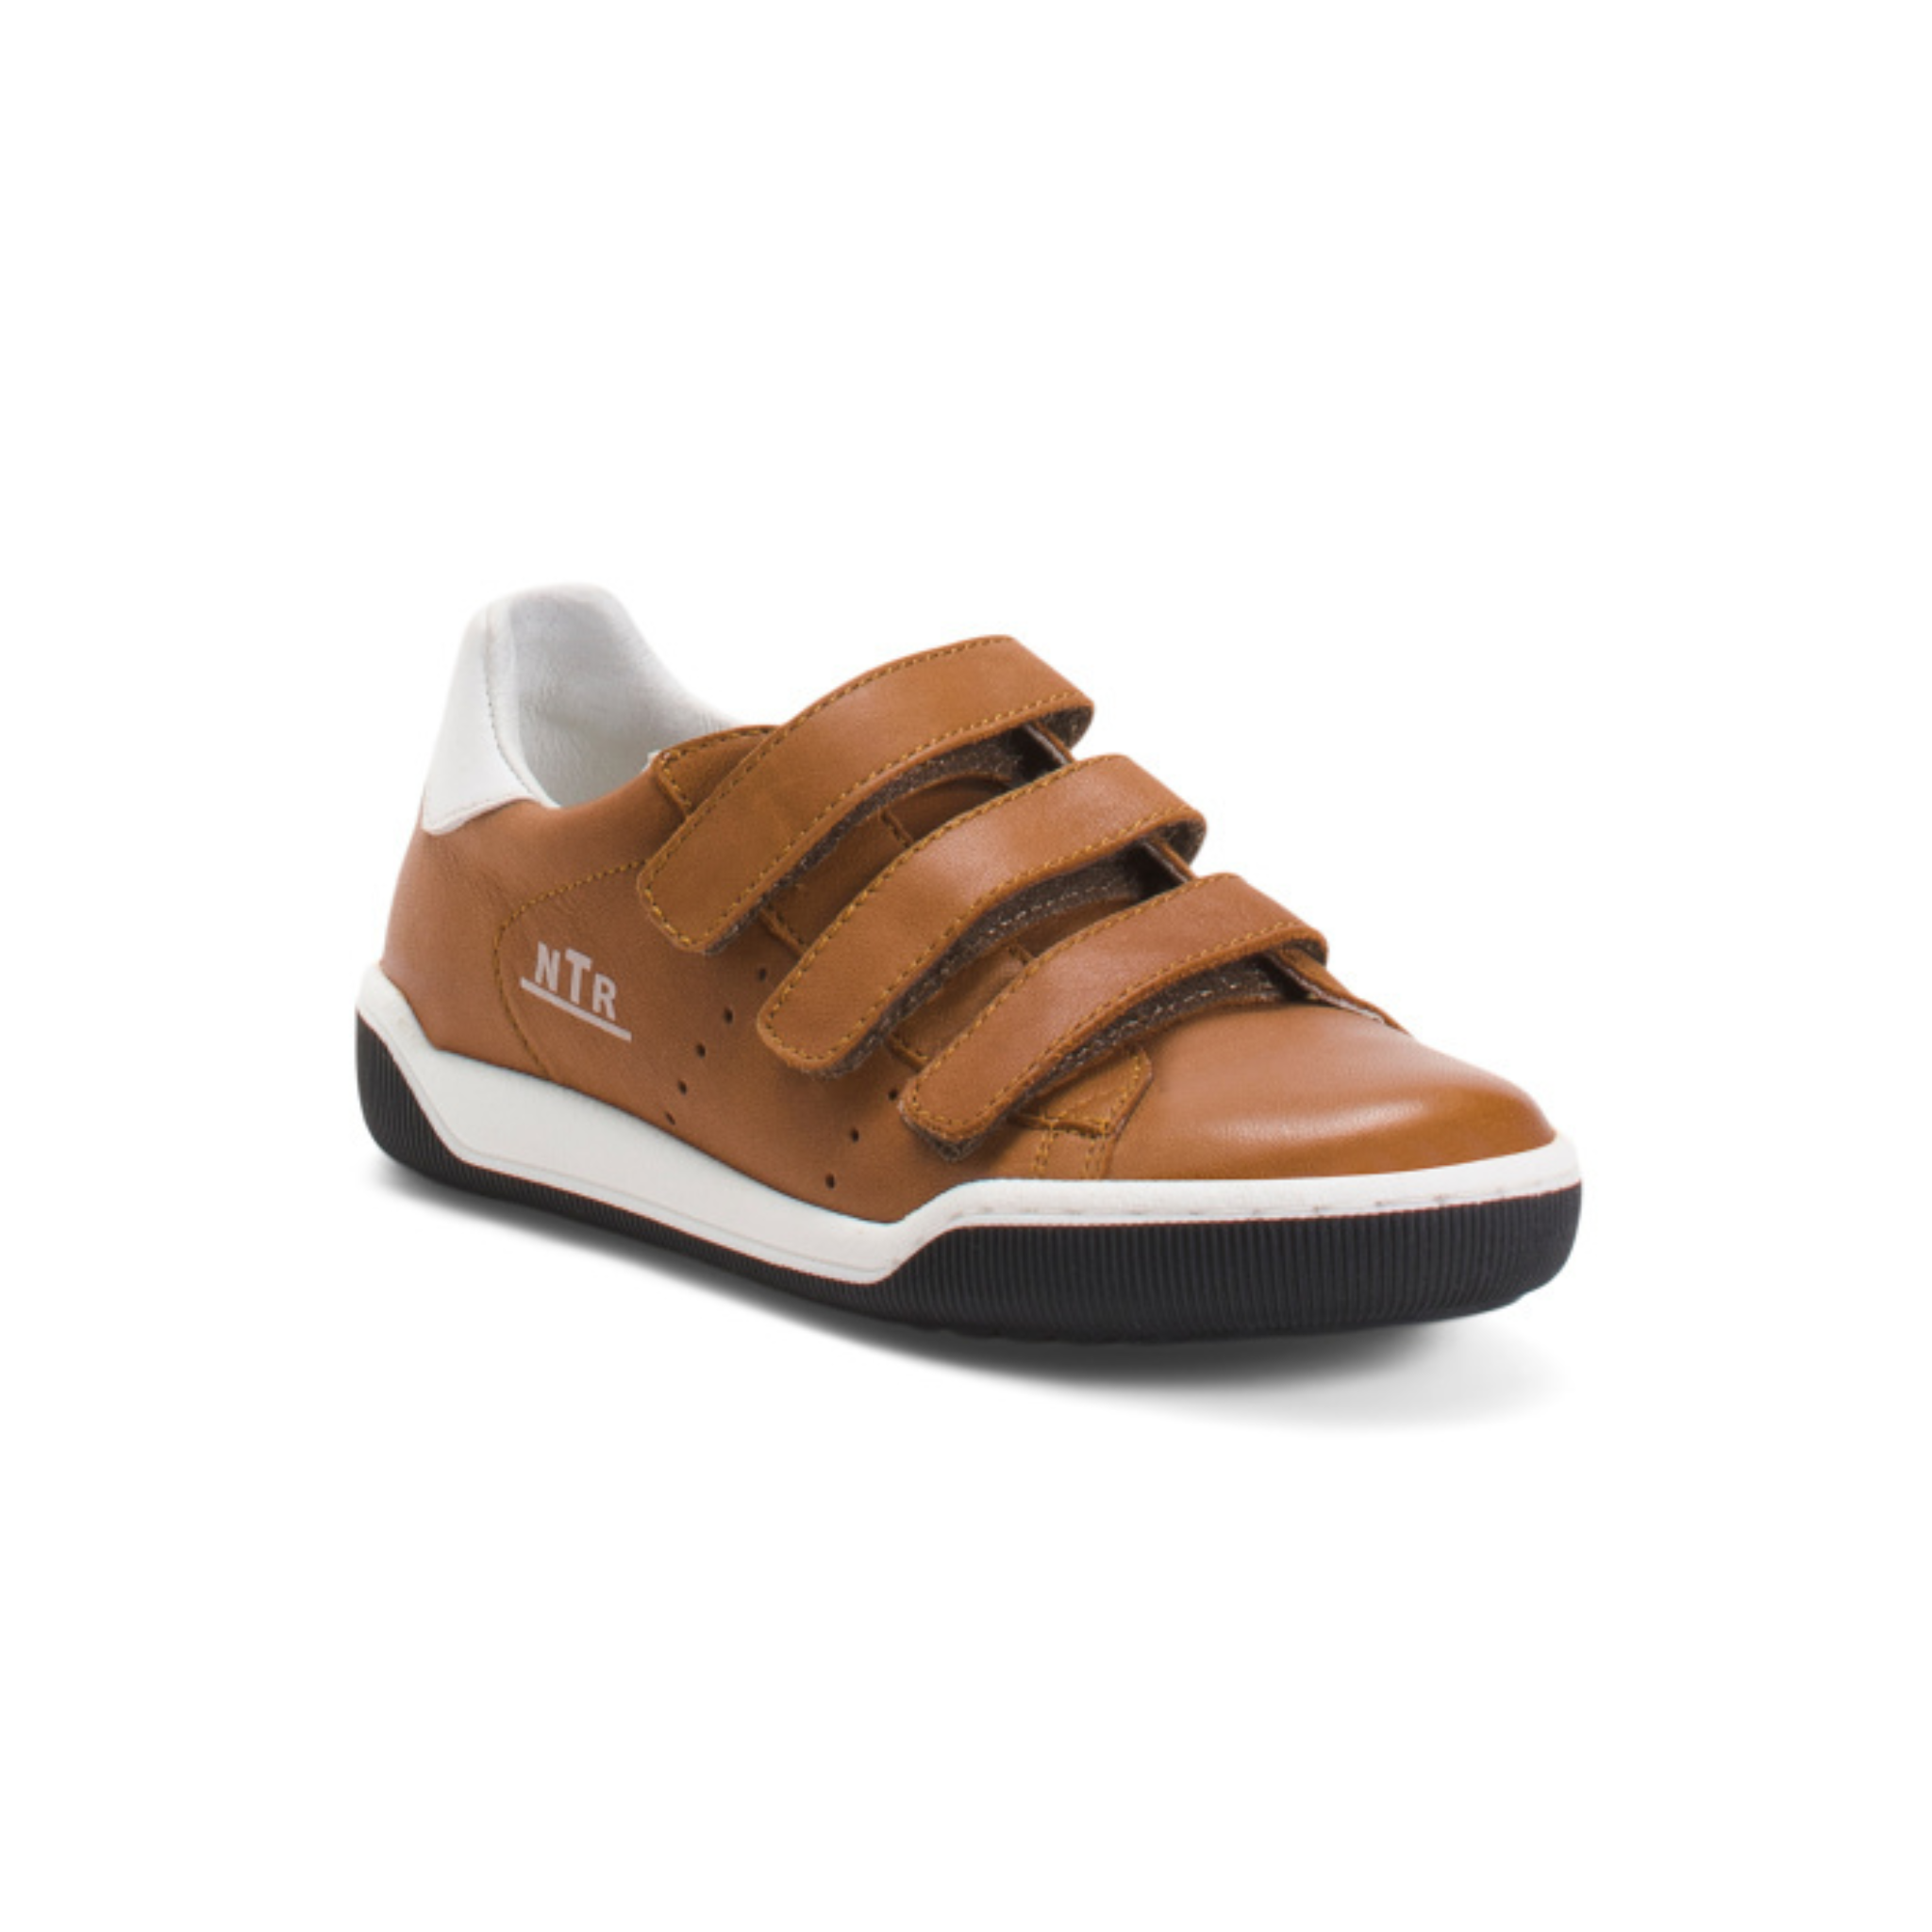 Naturino Cliff Kids Velcro Leather Sneakers